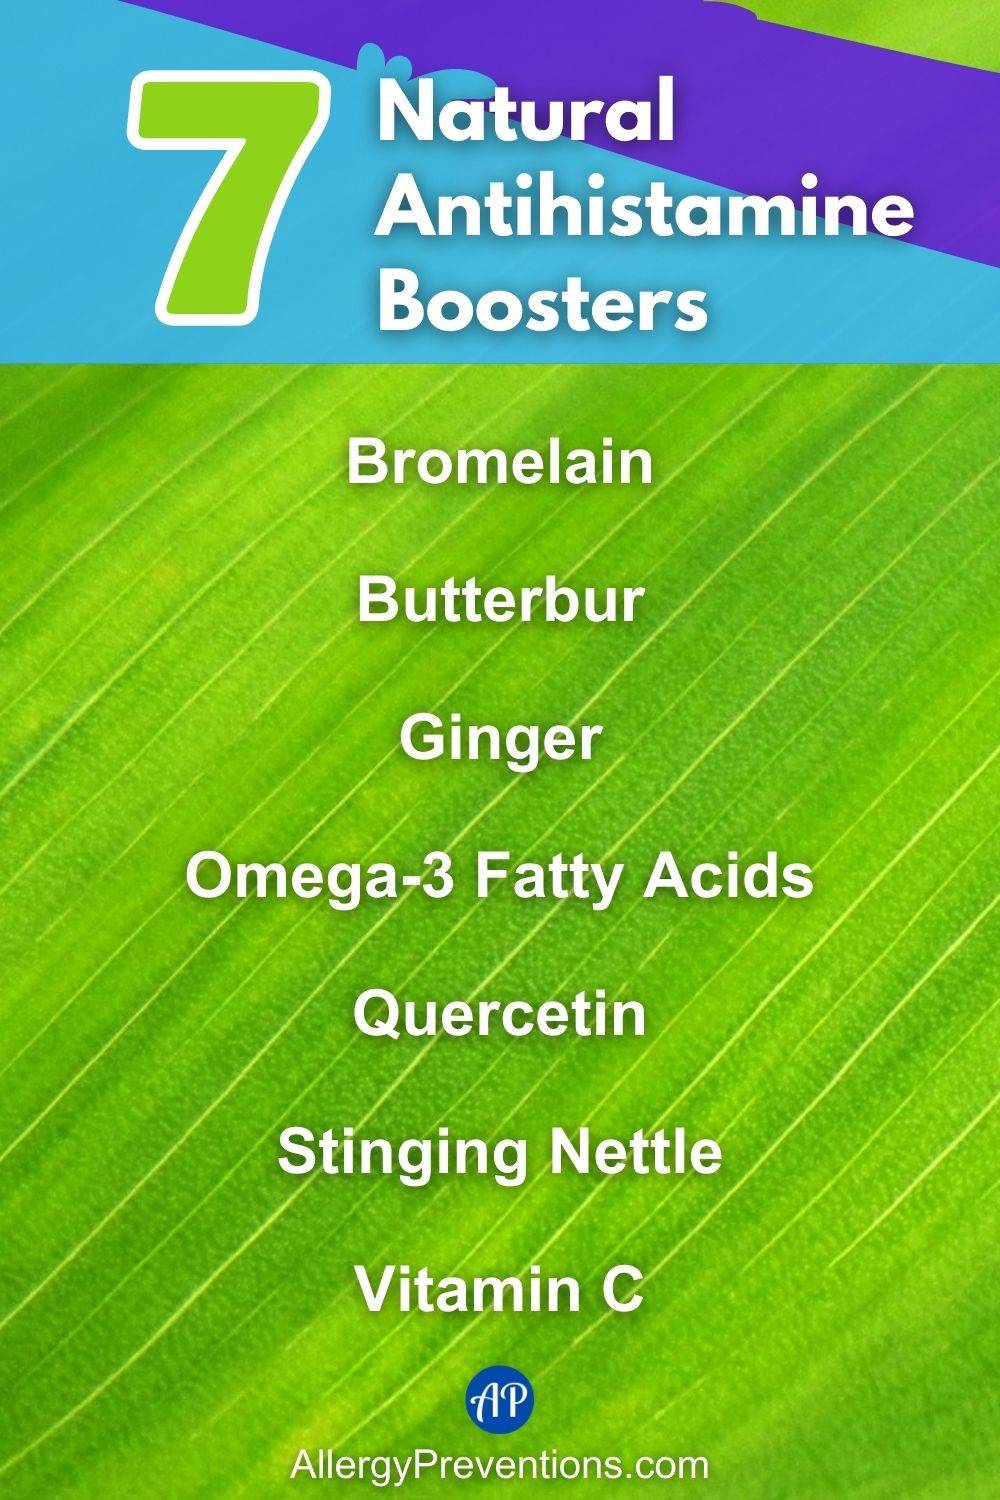 Natural Antihistamine Boosters Infographic. These foods are natural antihistamine boosters that may aid with soothing allergy and eczema symptoms: Bromelain, Butterbur, Ginger, Omega-3 Fatty Acids, Quercetin, Stinging Nettle, and Vitamin C.